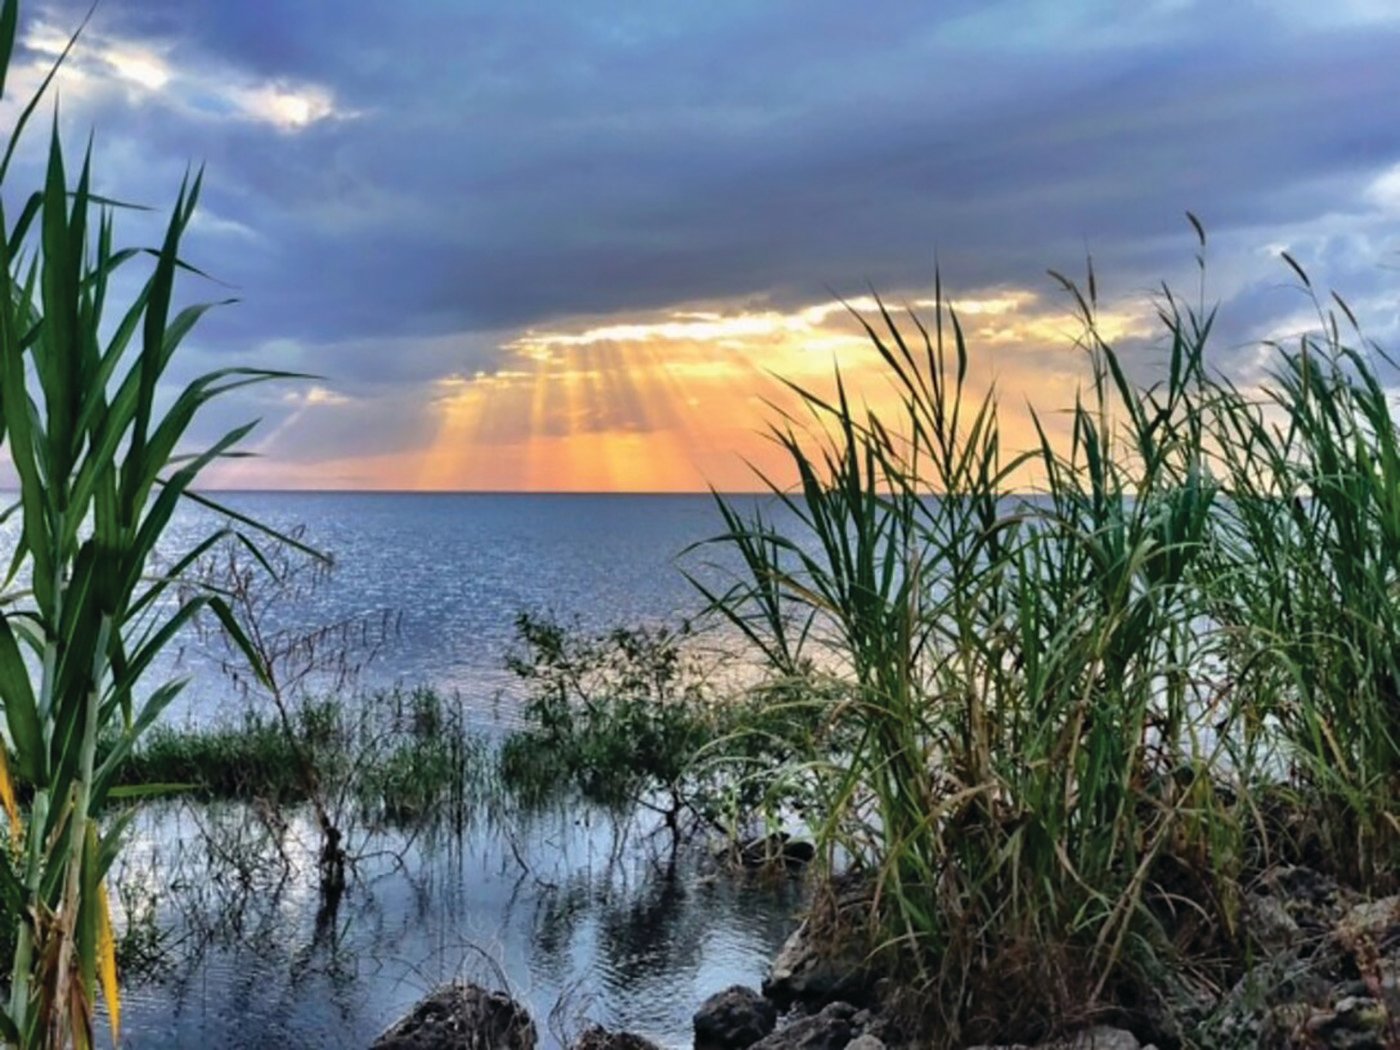 LAKE OKEECHOBEE – Lake Okeechobee, the second largest freshwater lake in the continental United States, is essential to the water supply for Florida’s east coast.